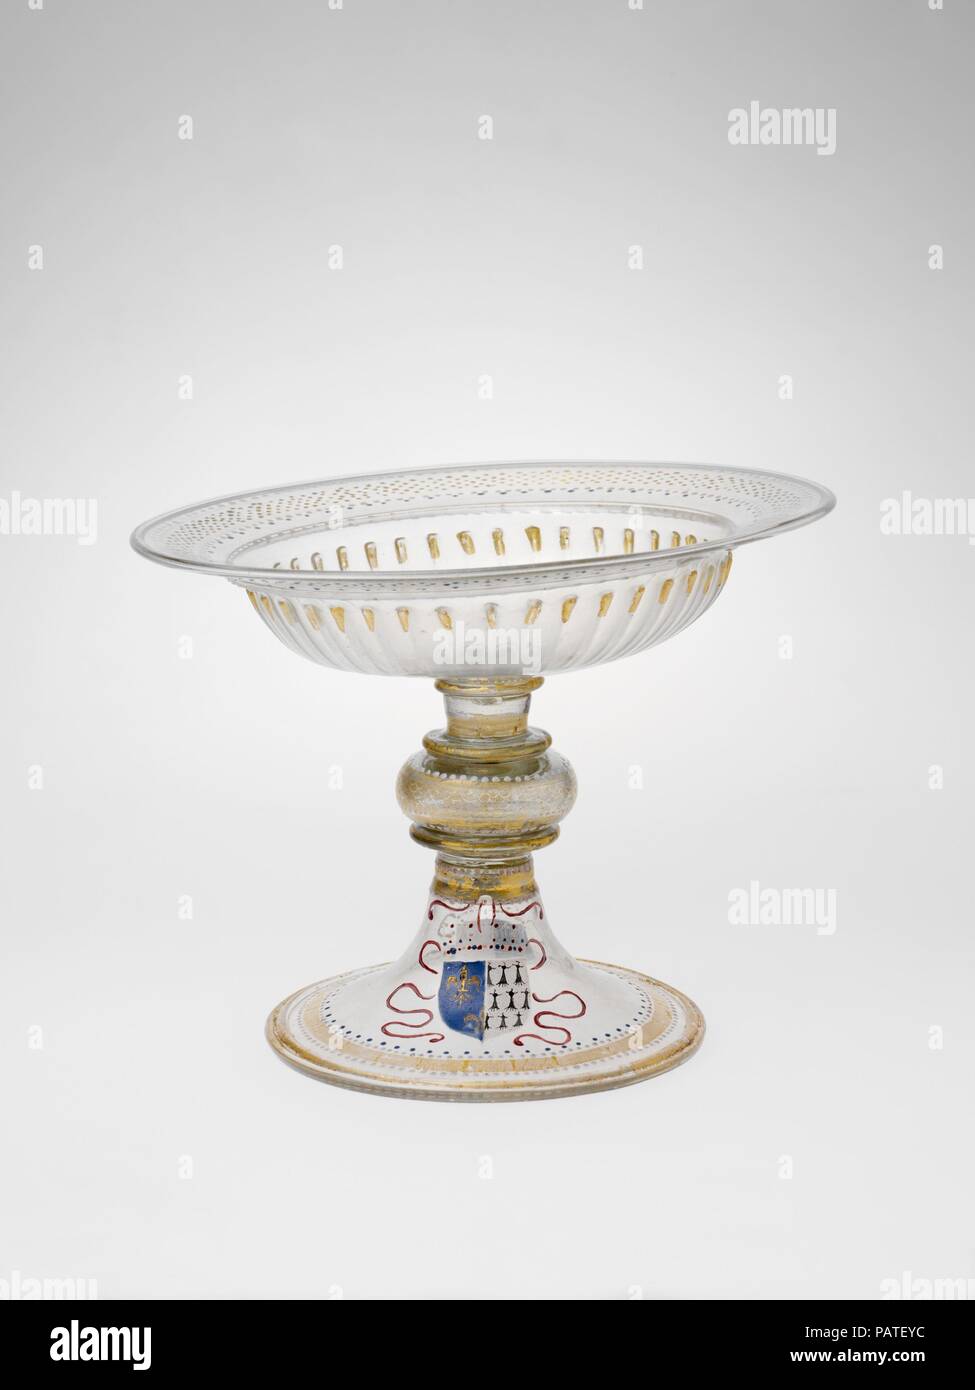 Armorial tazza. Artist: Italian (Venice) or façon de Venise (Venetian-style); Possibly French. Culture: Venetian or façon de Venise, or French. Dimensions: 8 11/16 in.  (22.1 cm); diam. of rim 10 7/8 in. (27.6 cm). Date: 1499-1514.  This tazza bears the coats of arms of Louis XII of France (1462-1515; r. 1498-1515) and Anne, duchess of Brittany (1477-1514). It is believed to have been part of a service made to celebrate their marriage, which took place in 1499. Three other pieces from this presumed service are known. French glassmakers were able to emulate Venetian examples of the period; thou Stock Photo